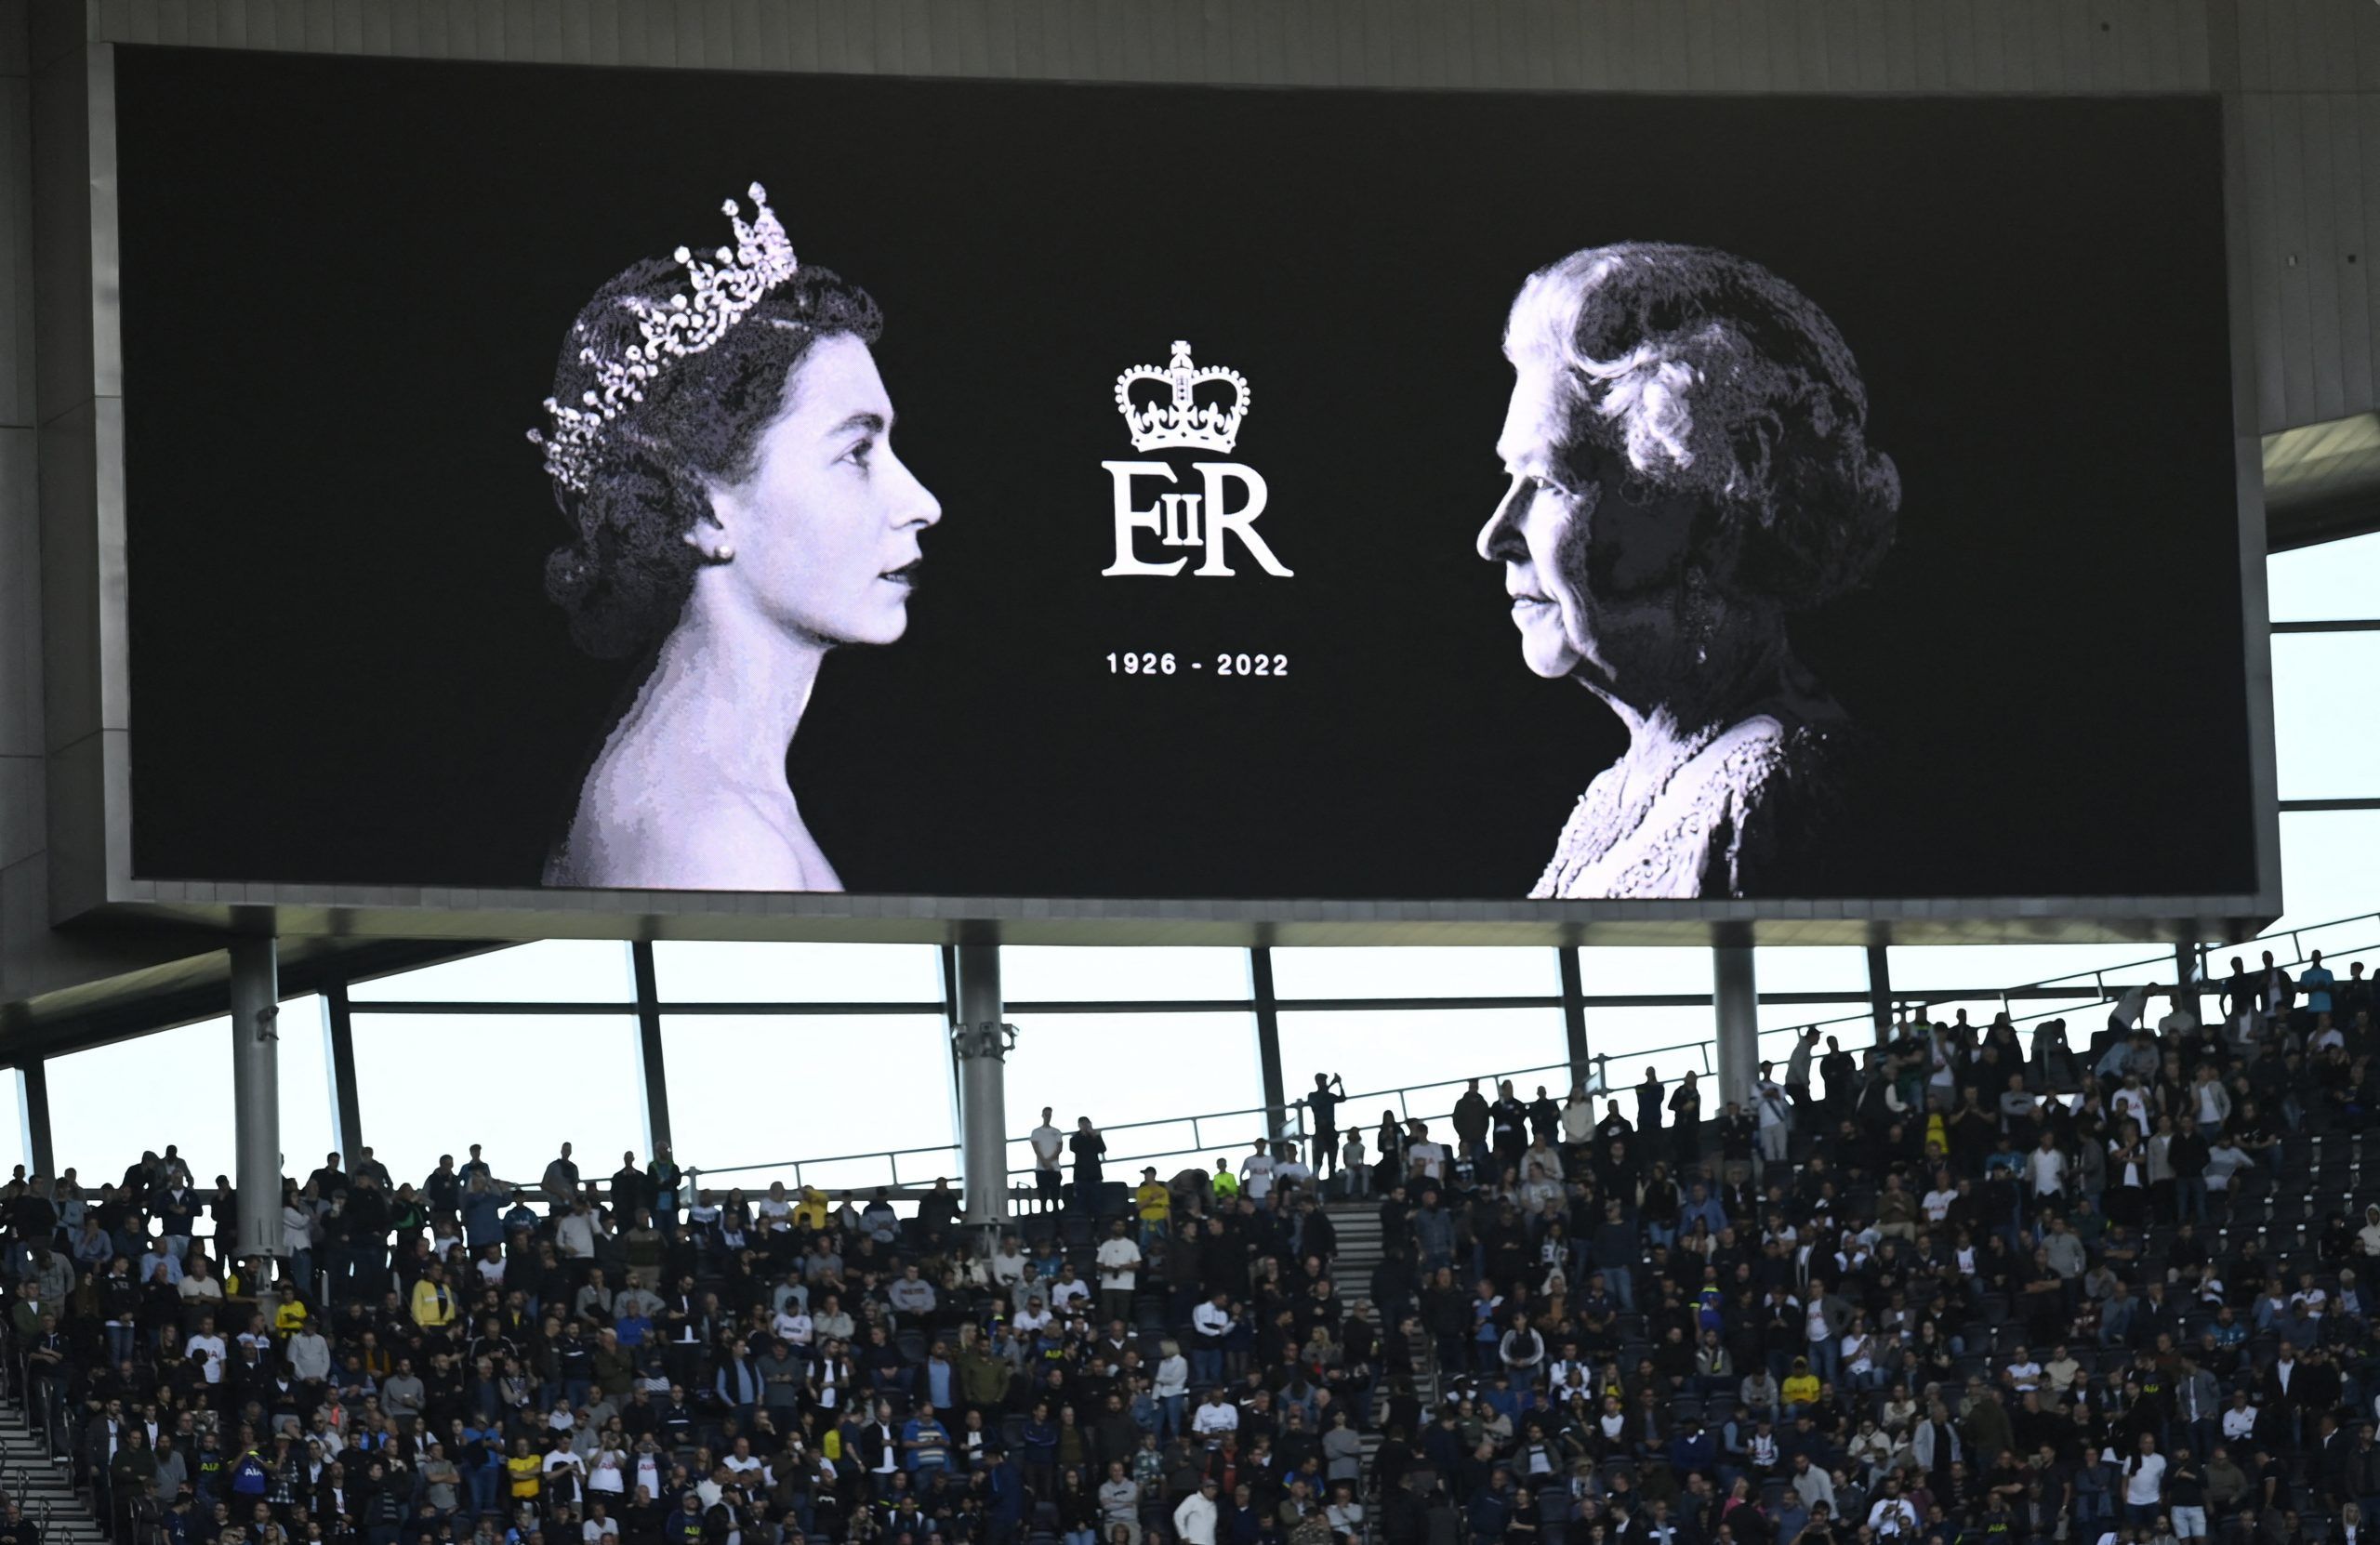 Soccer Football - Premier League - Tottenham Hotspur v Leicester City - Tottenham Hotspur Stadium, London, Britain - September 17, 2022 General view of the big screen inside the stadium before the match following the death of Britain's Queen Elizabeth REUTERS/Tony Obrien EDITORIAL USE ONLY. No use with unauthorized audio, video, data, fixture lists, club/league logos or 'live' services. Online in-match use limited to 75 images, no video emulation. No use in betting, games or single club /league/